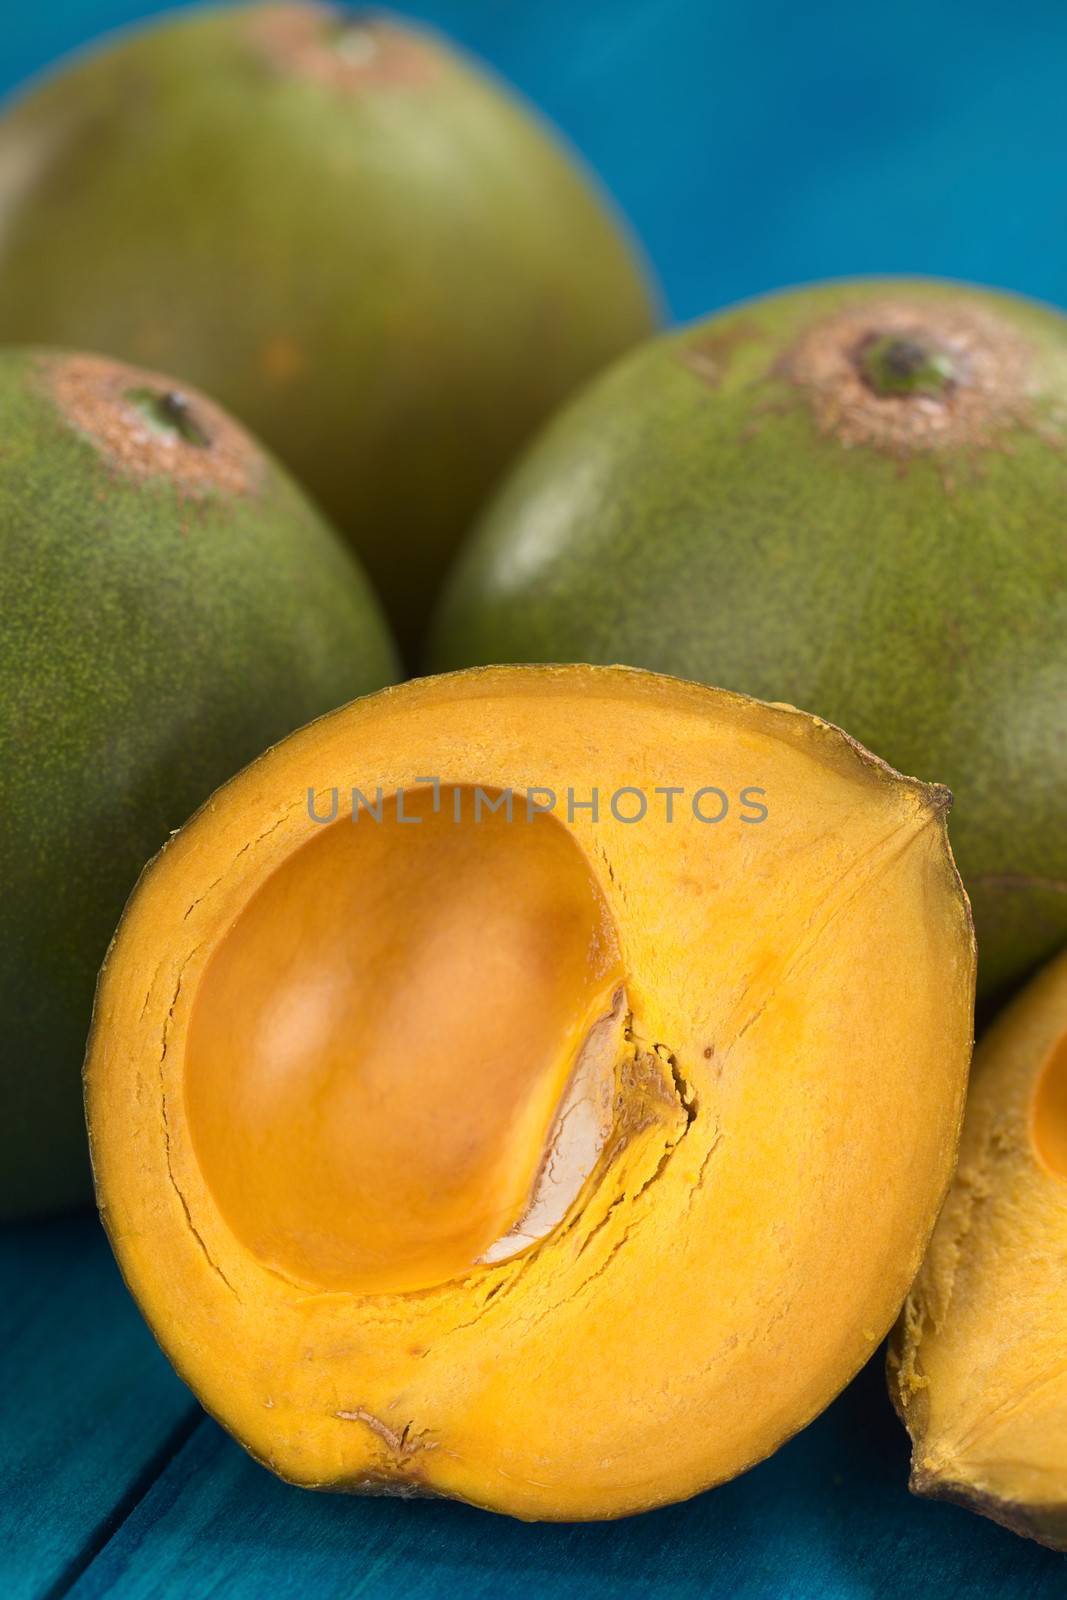 Peruvian fruit called Lucuma (lat. Pouteria lucuma) which has a dry, sweet flesh, and is mostly used to prepare juices, milkshakes, yogurts, ice cream and other desserts (Selective Focus, Focus on the front of the standing lucuma half) 